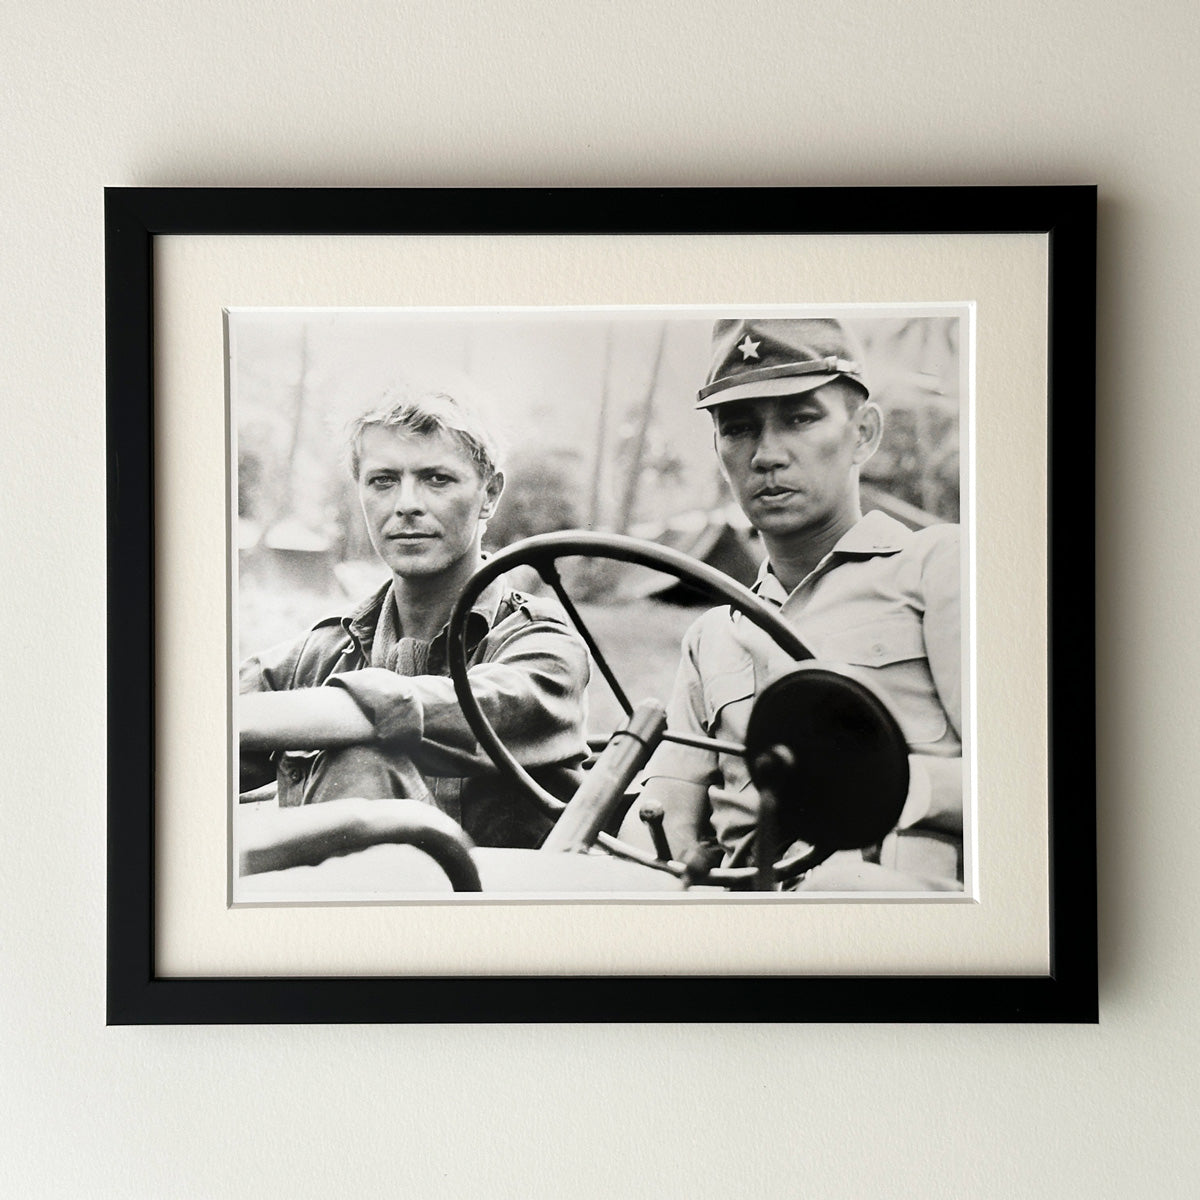 Merry Christmas Mr. Lawrence (1983) David Bowie Publicity Film Movie Still - Framed